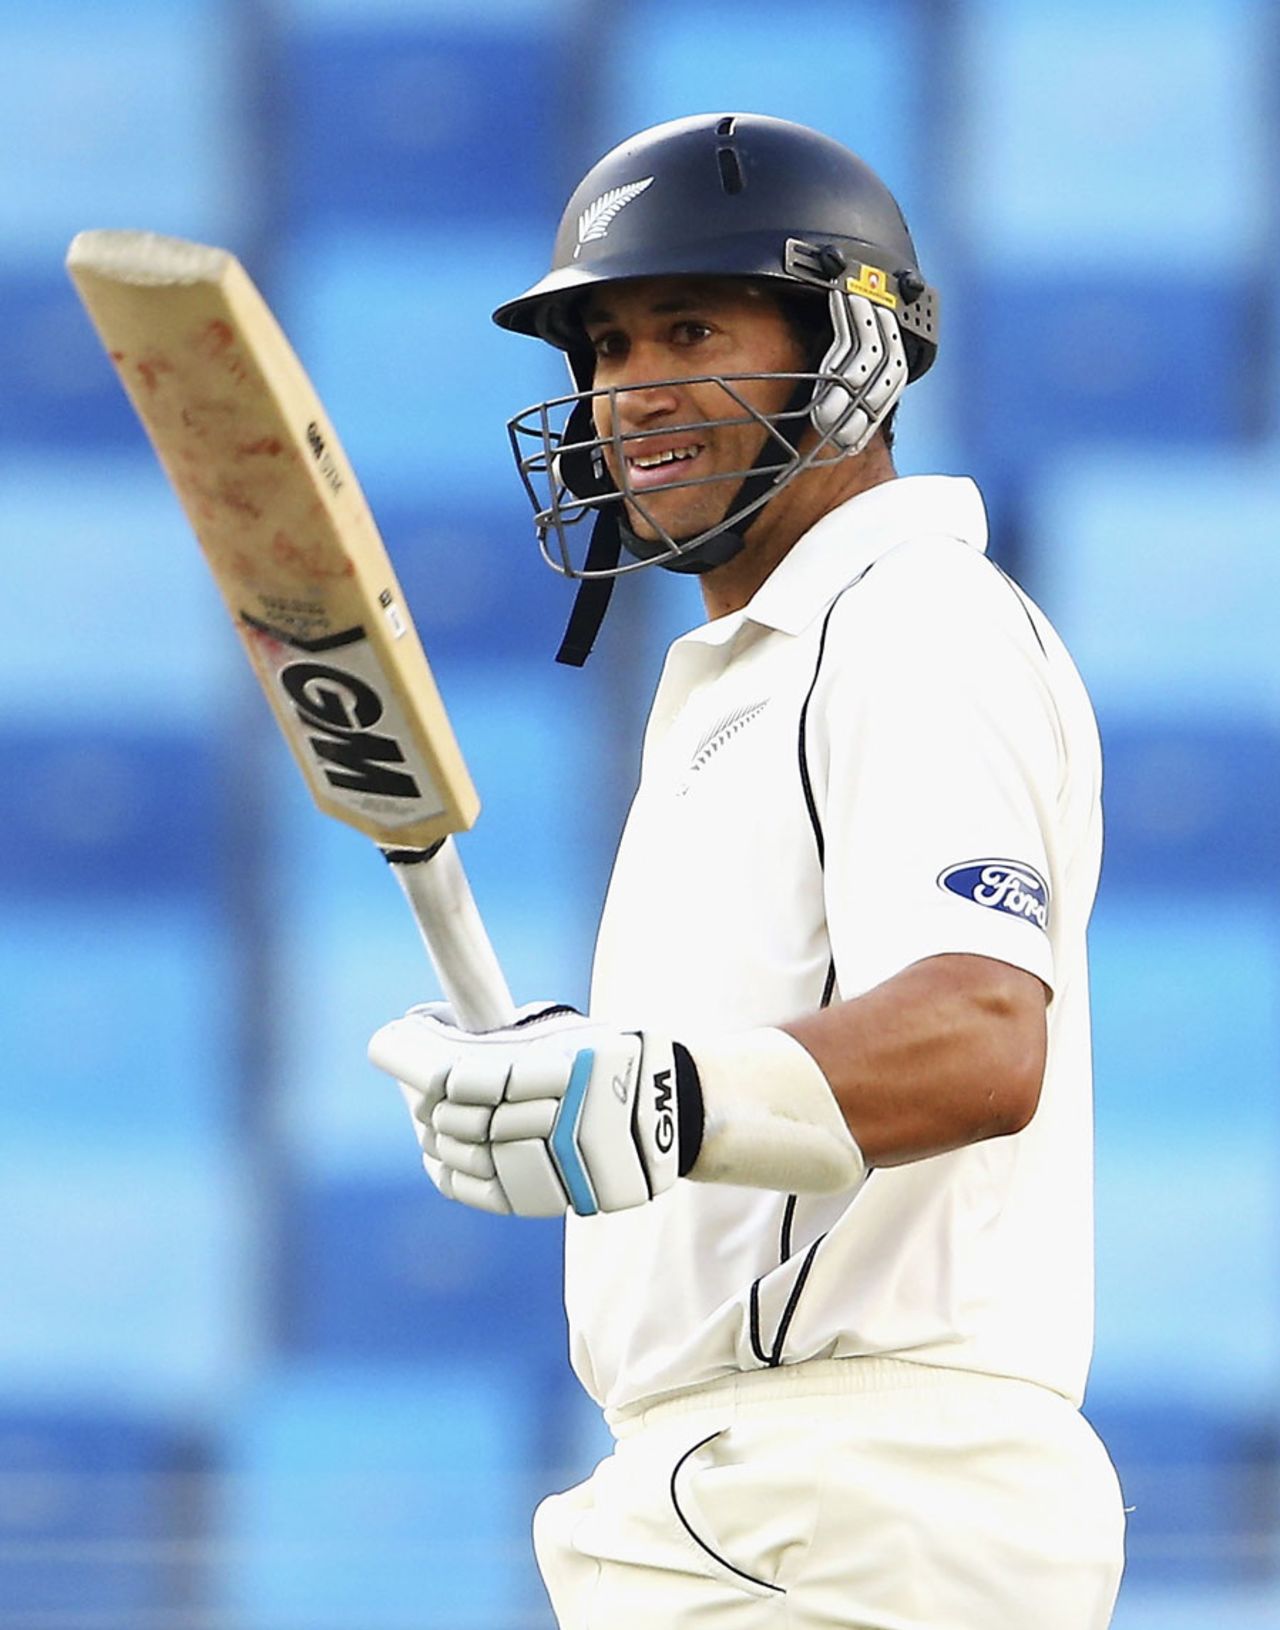 Ross Taylor's fifty helped New Zealand recover from a top-order wobble, Pakistan v New Zealand, 2nd Test, Dubai, 4th day, November 20, 2014